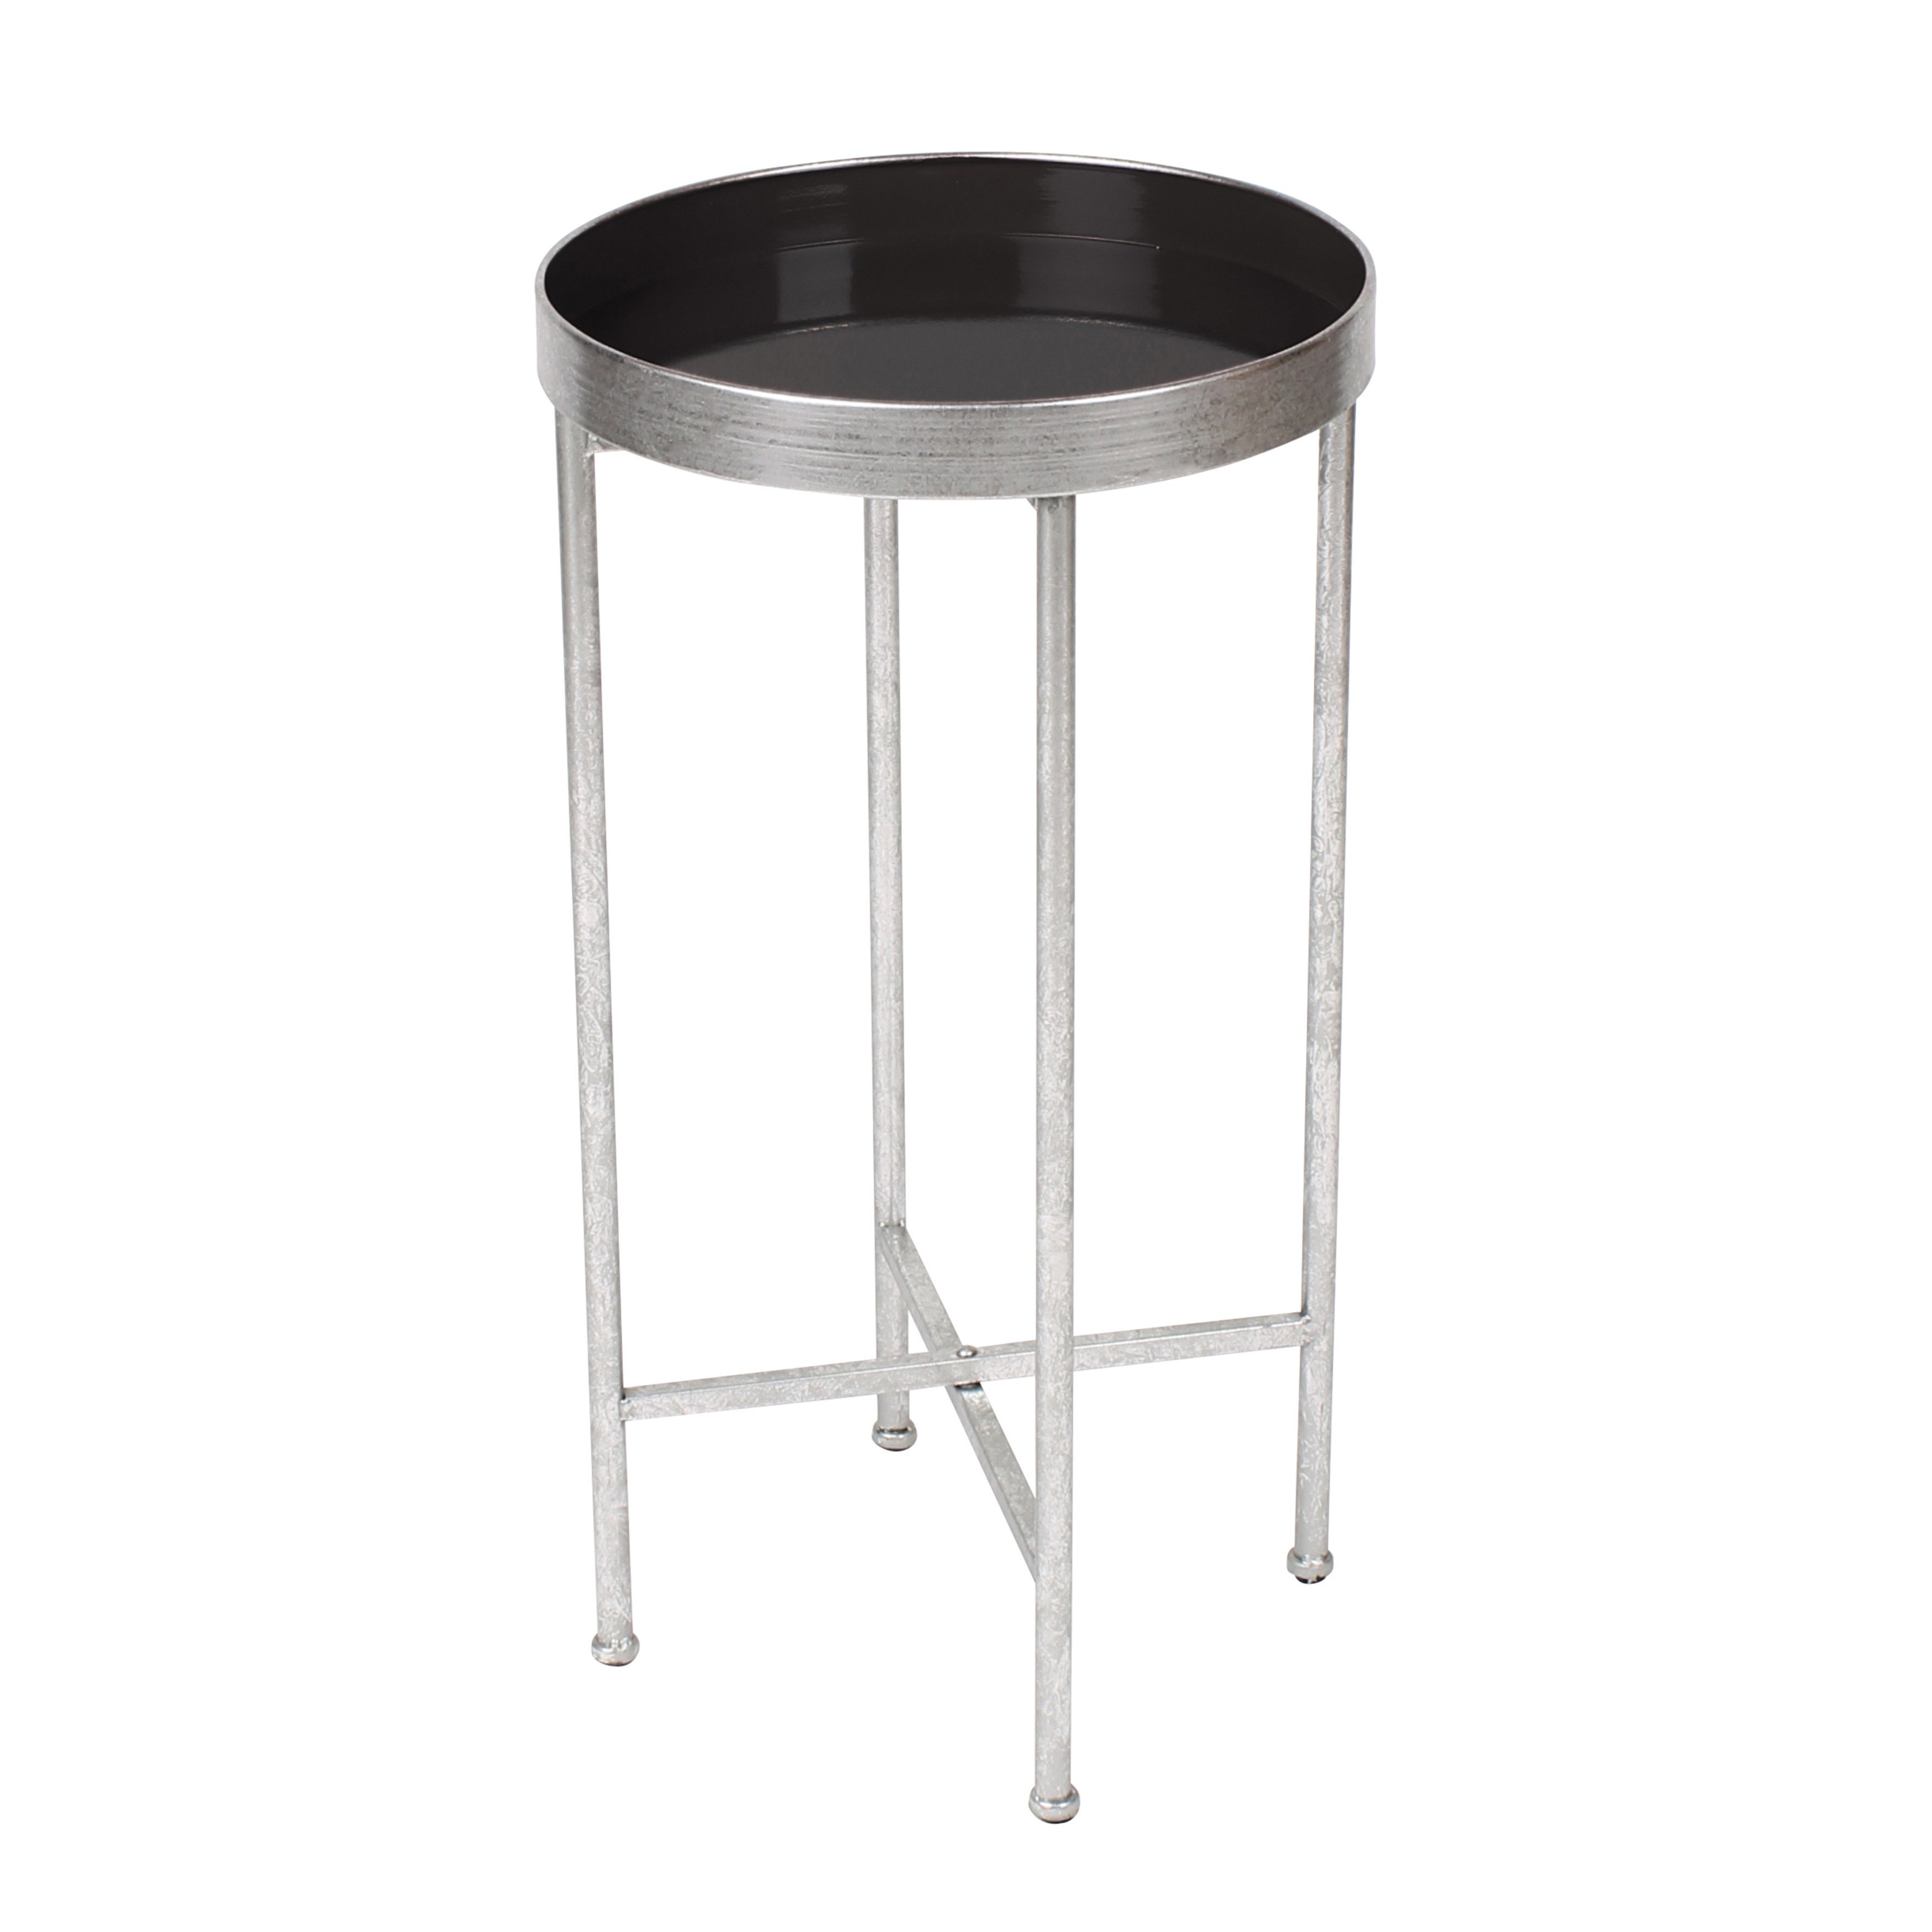 kate and laurel deliah two tone metal inch round foldable tray accent table free shipping today short floor lamps outdoor shelf pier coupon code end with lamp attached marble